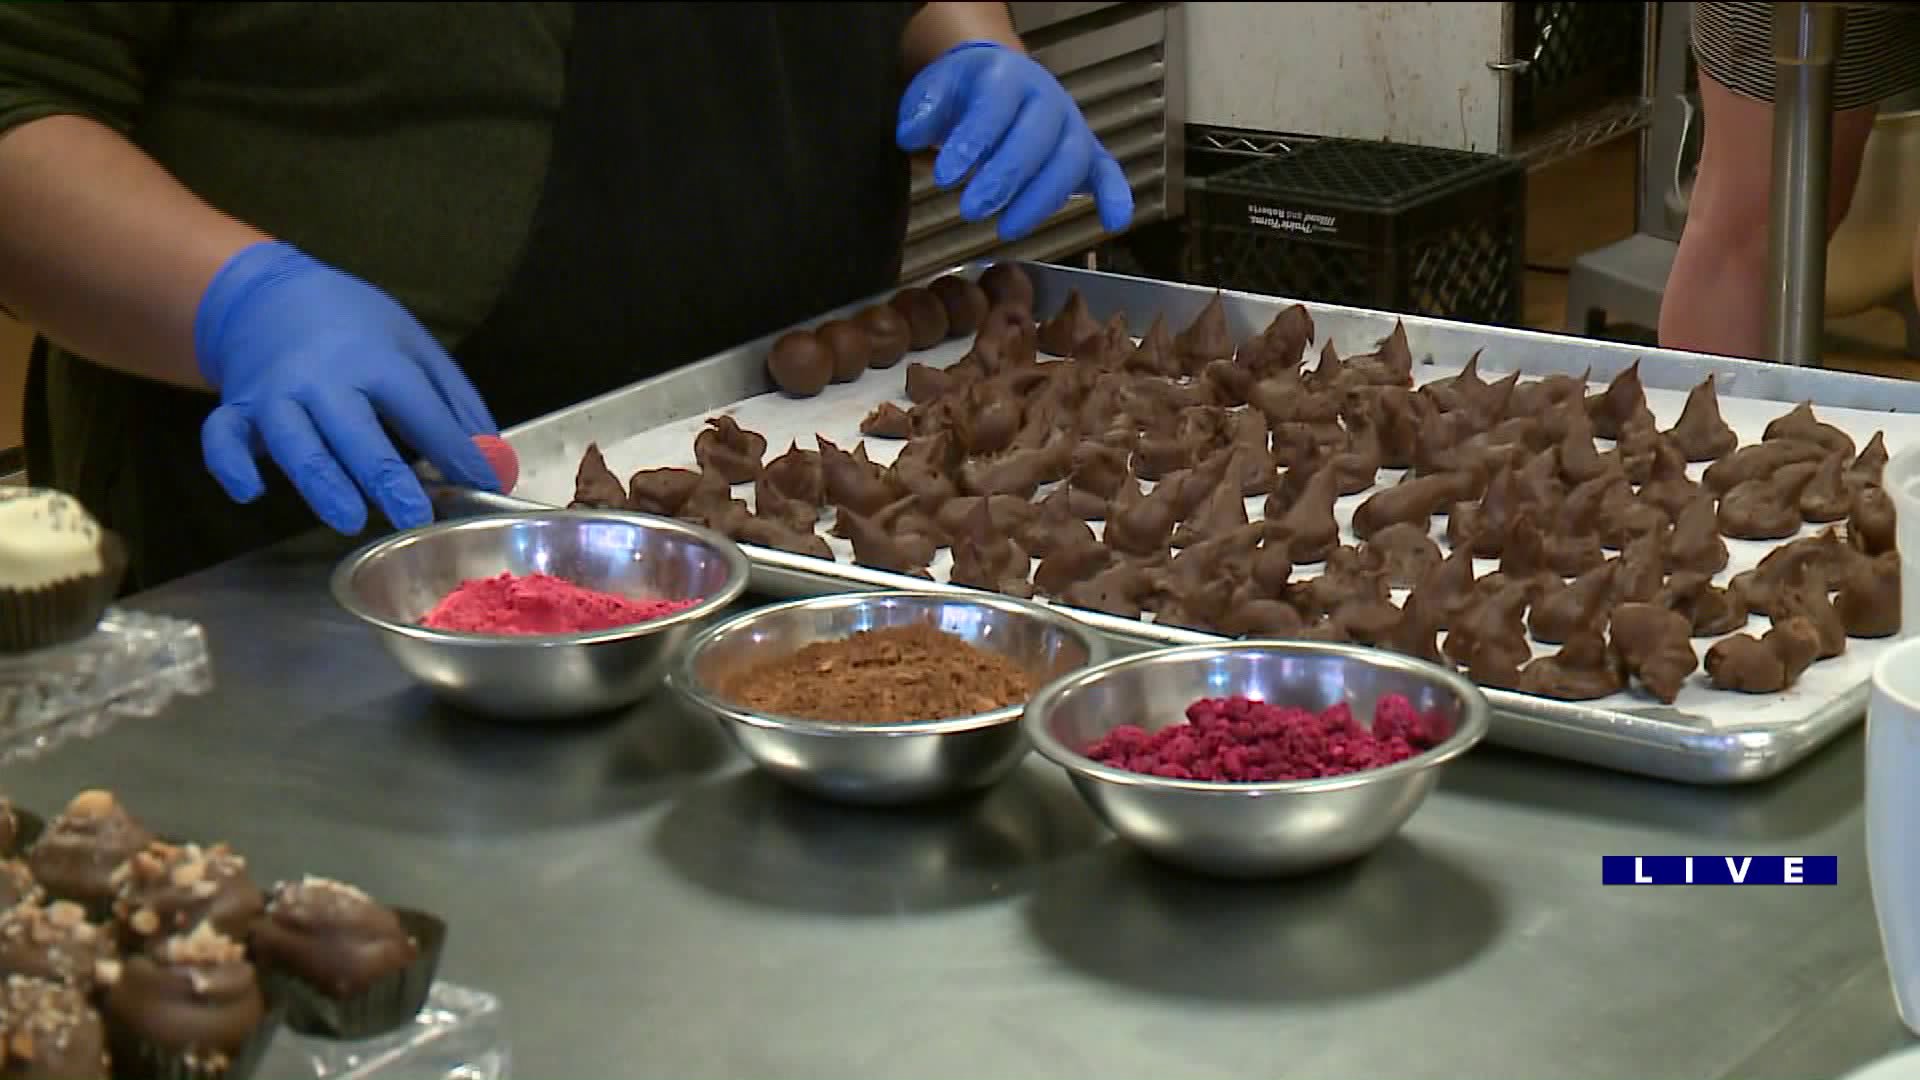 Around Town checks out Katherine Anne Confections